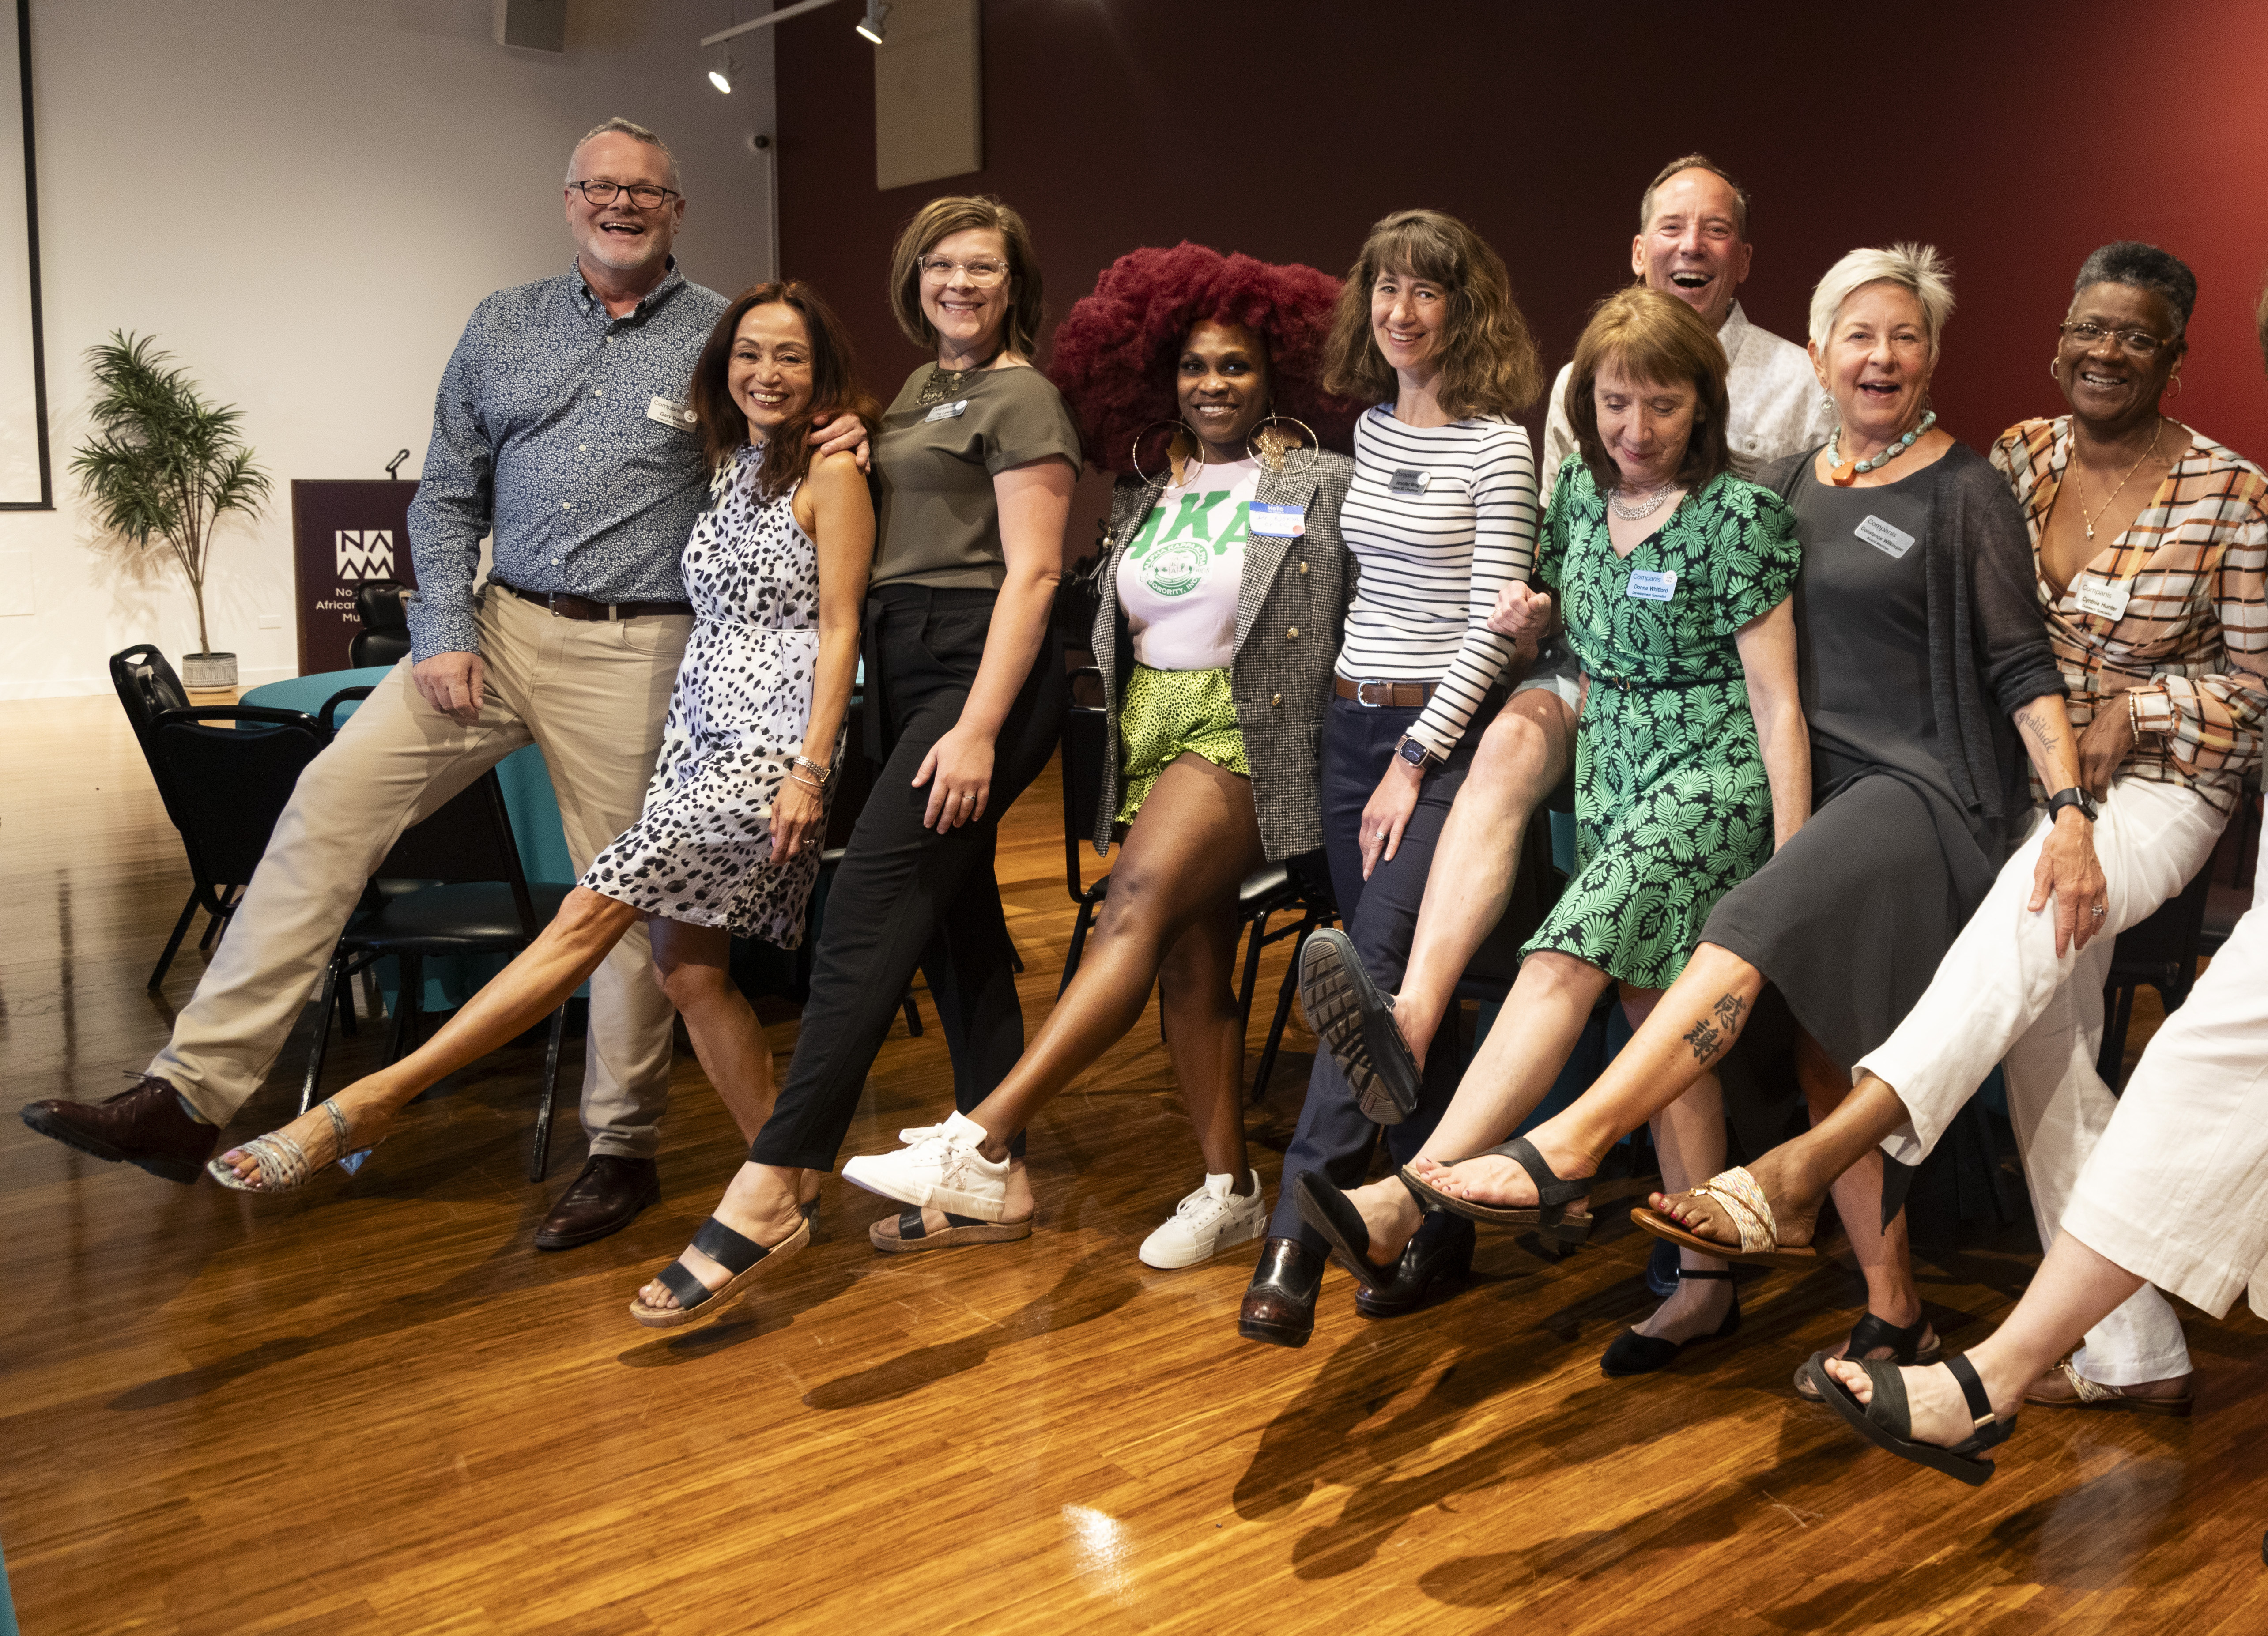 Companis staff, guests and volunteers kick up their heels after our summer Spotlight event at the Northwest African American Museum